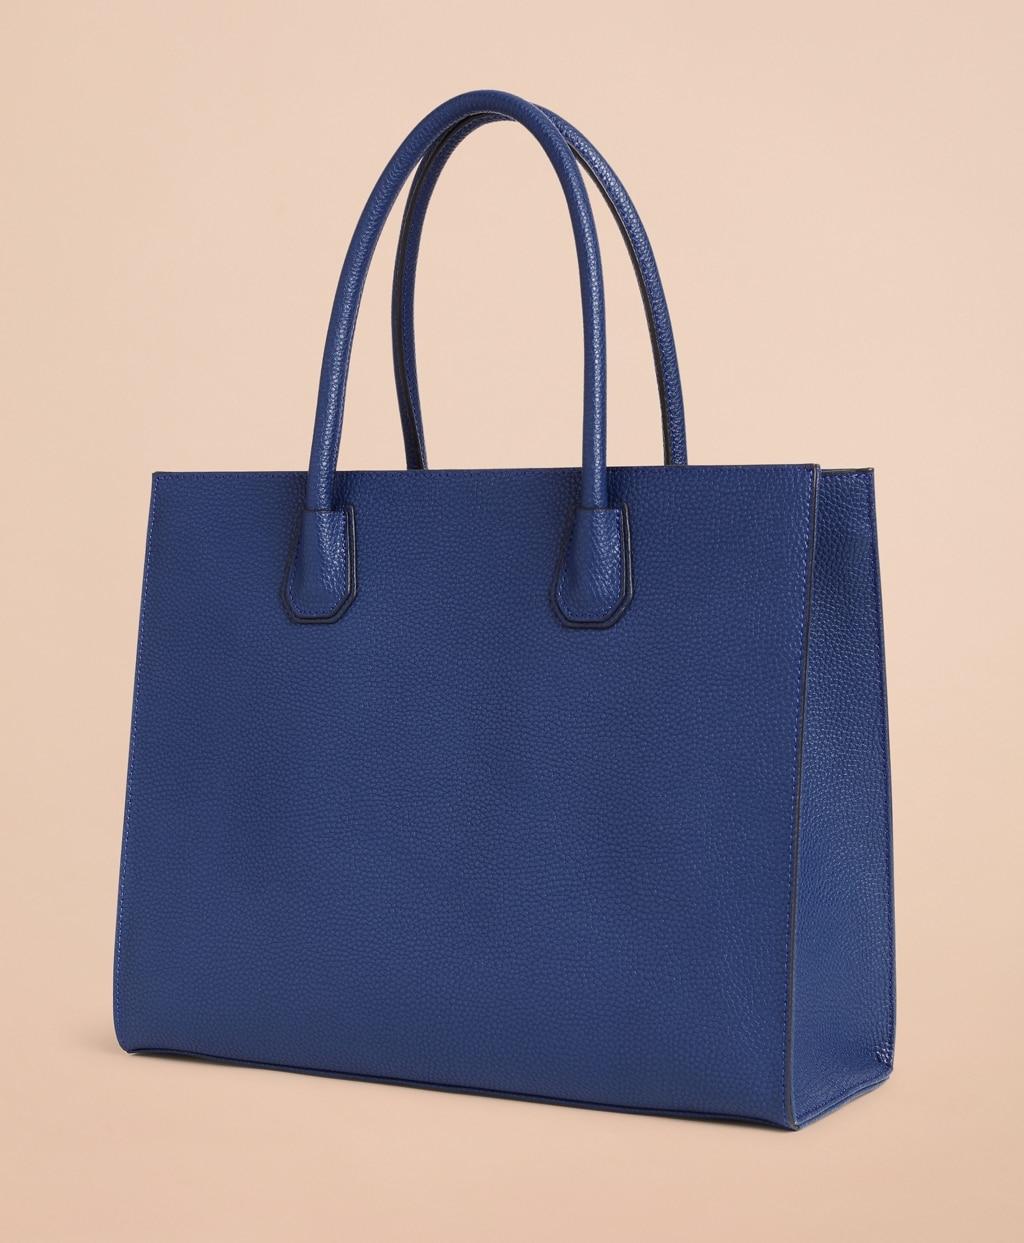 Brooks Brothers Pebbled Leather Tote Bag in Blue - Lyst